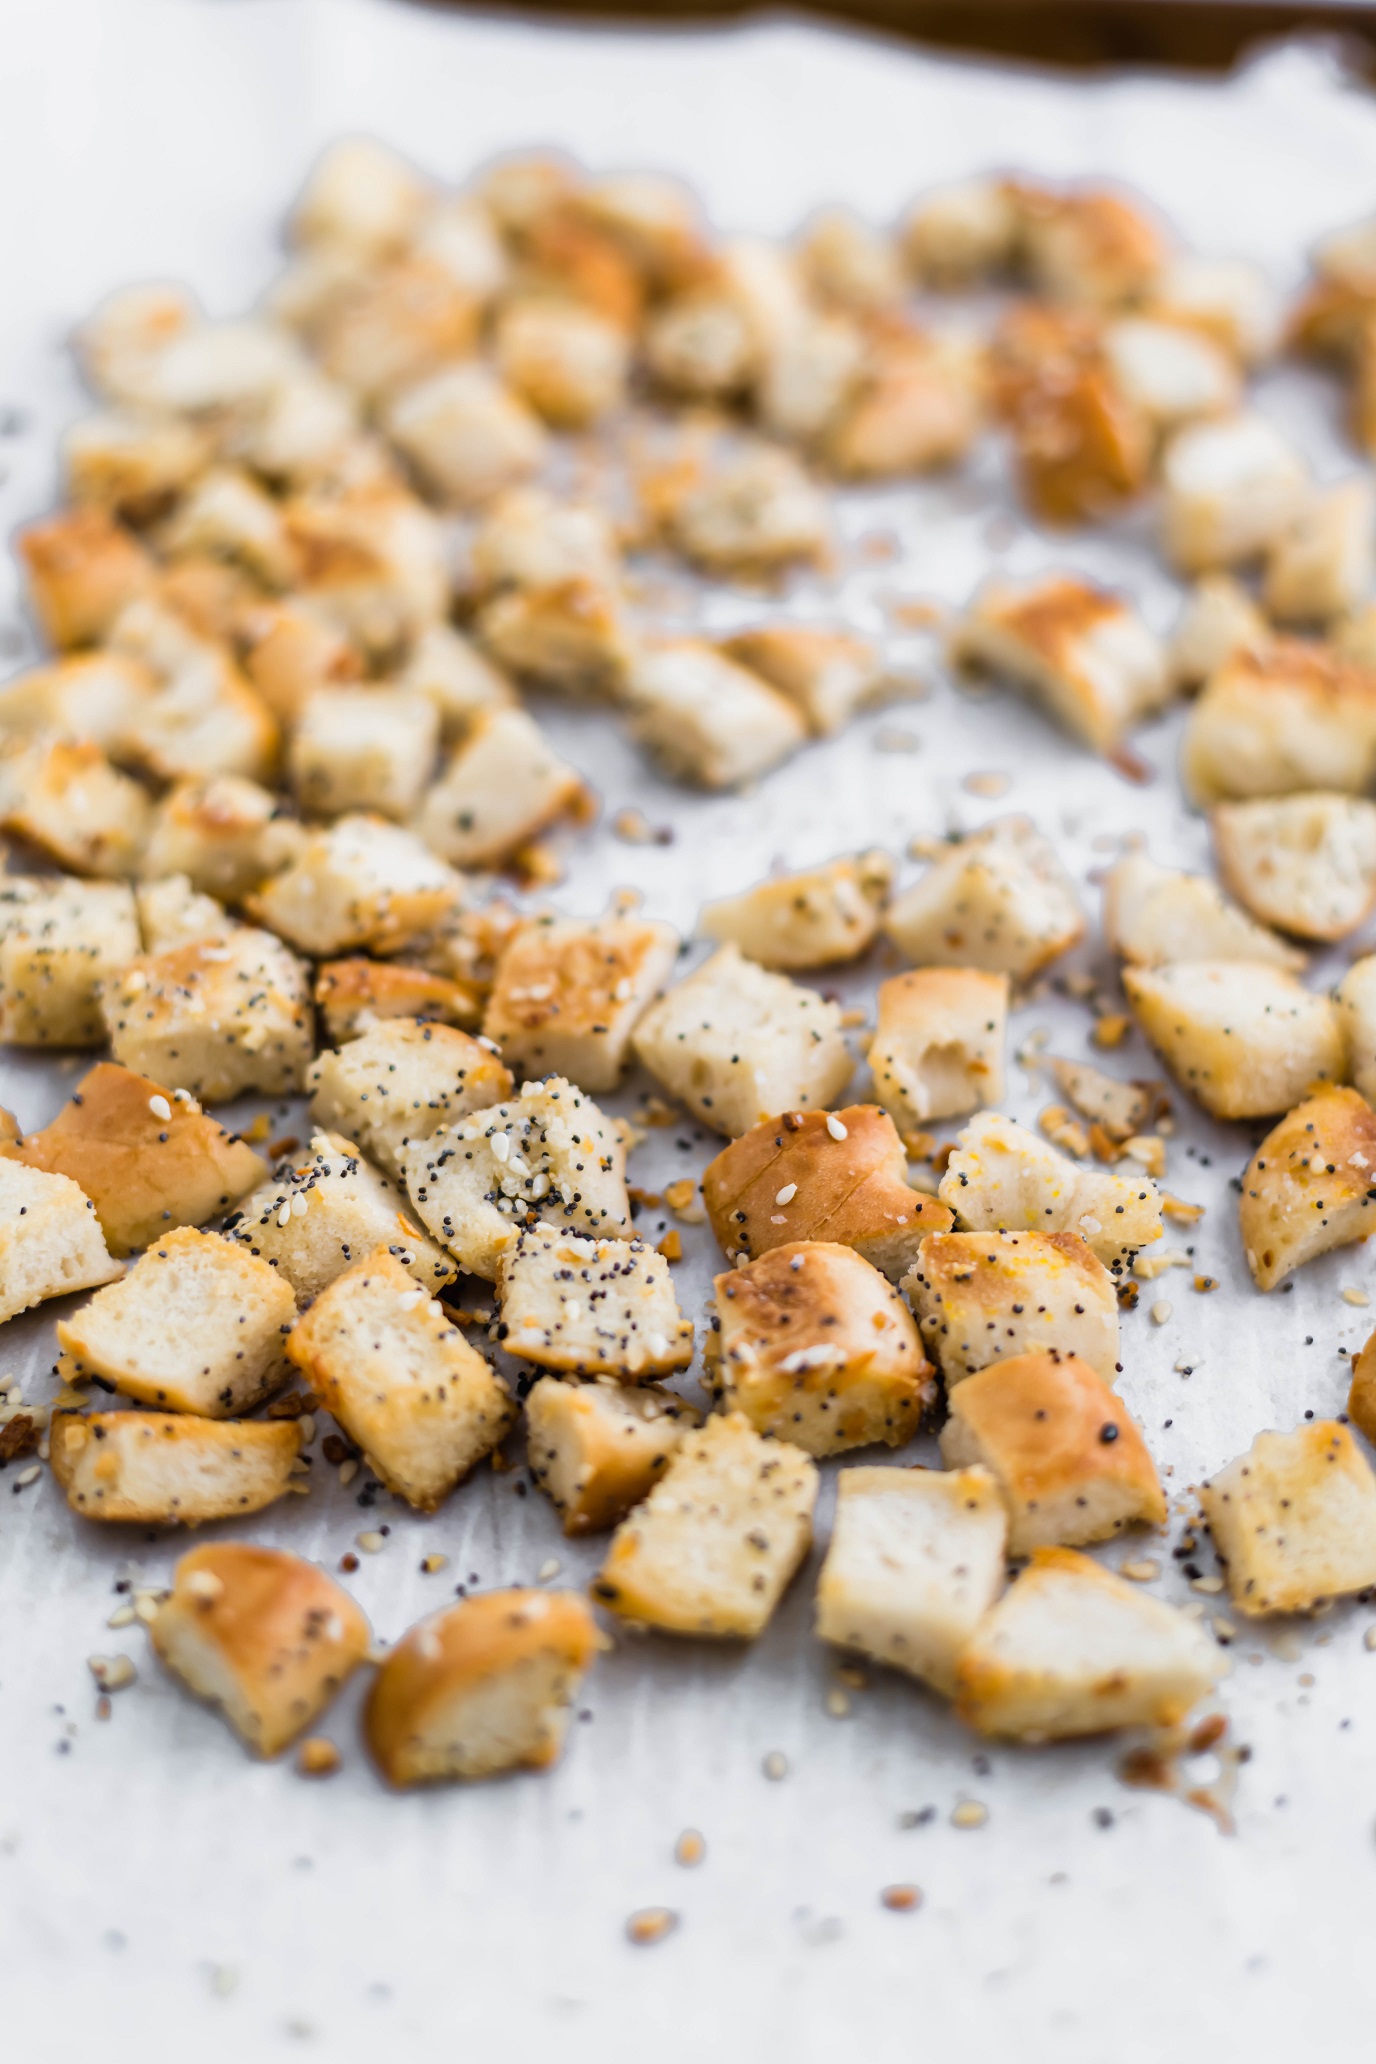 Don't let those day old bagels go to waste. Use them to make these delicious Everything Bagel Croutons for the most delicious salad topping.